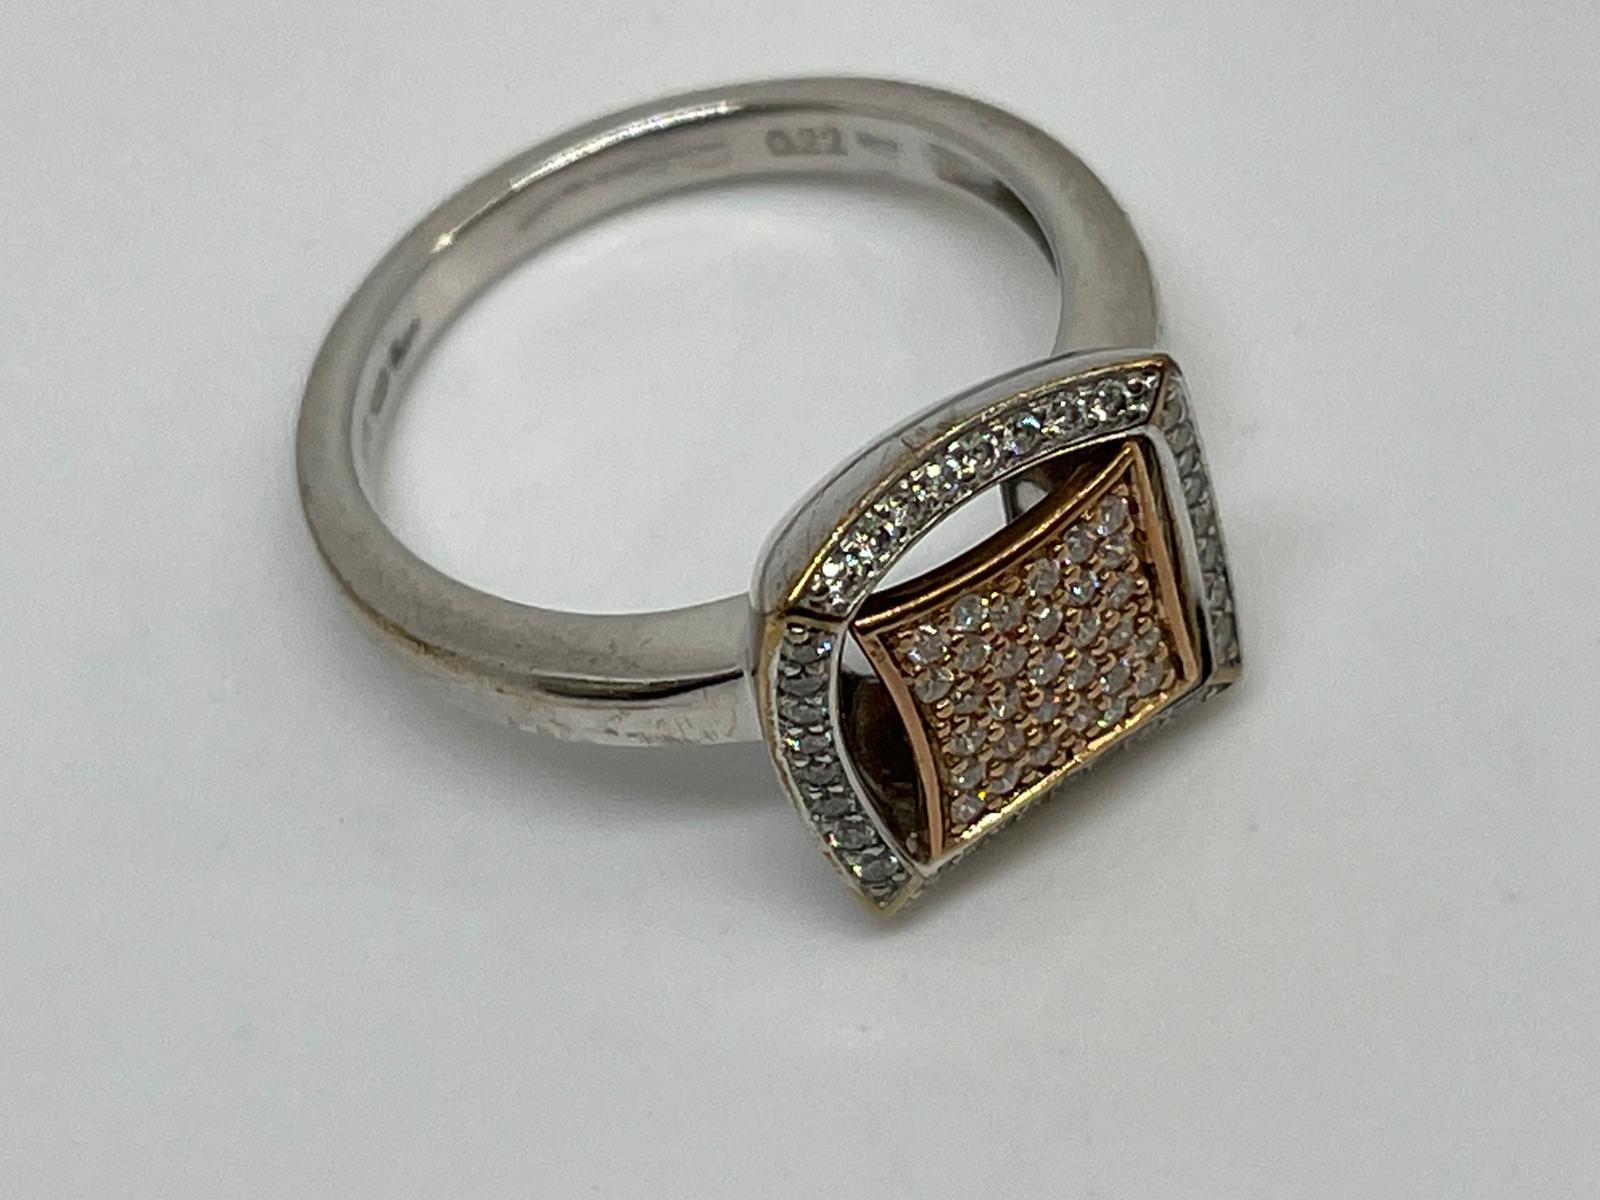 9ct white and rose gold diamond ring - Image 2 of 2